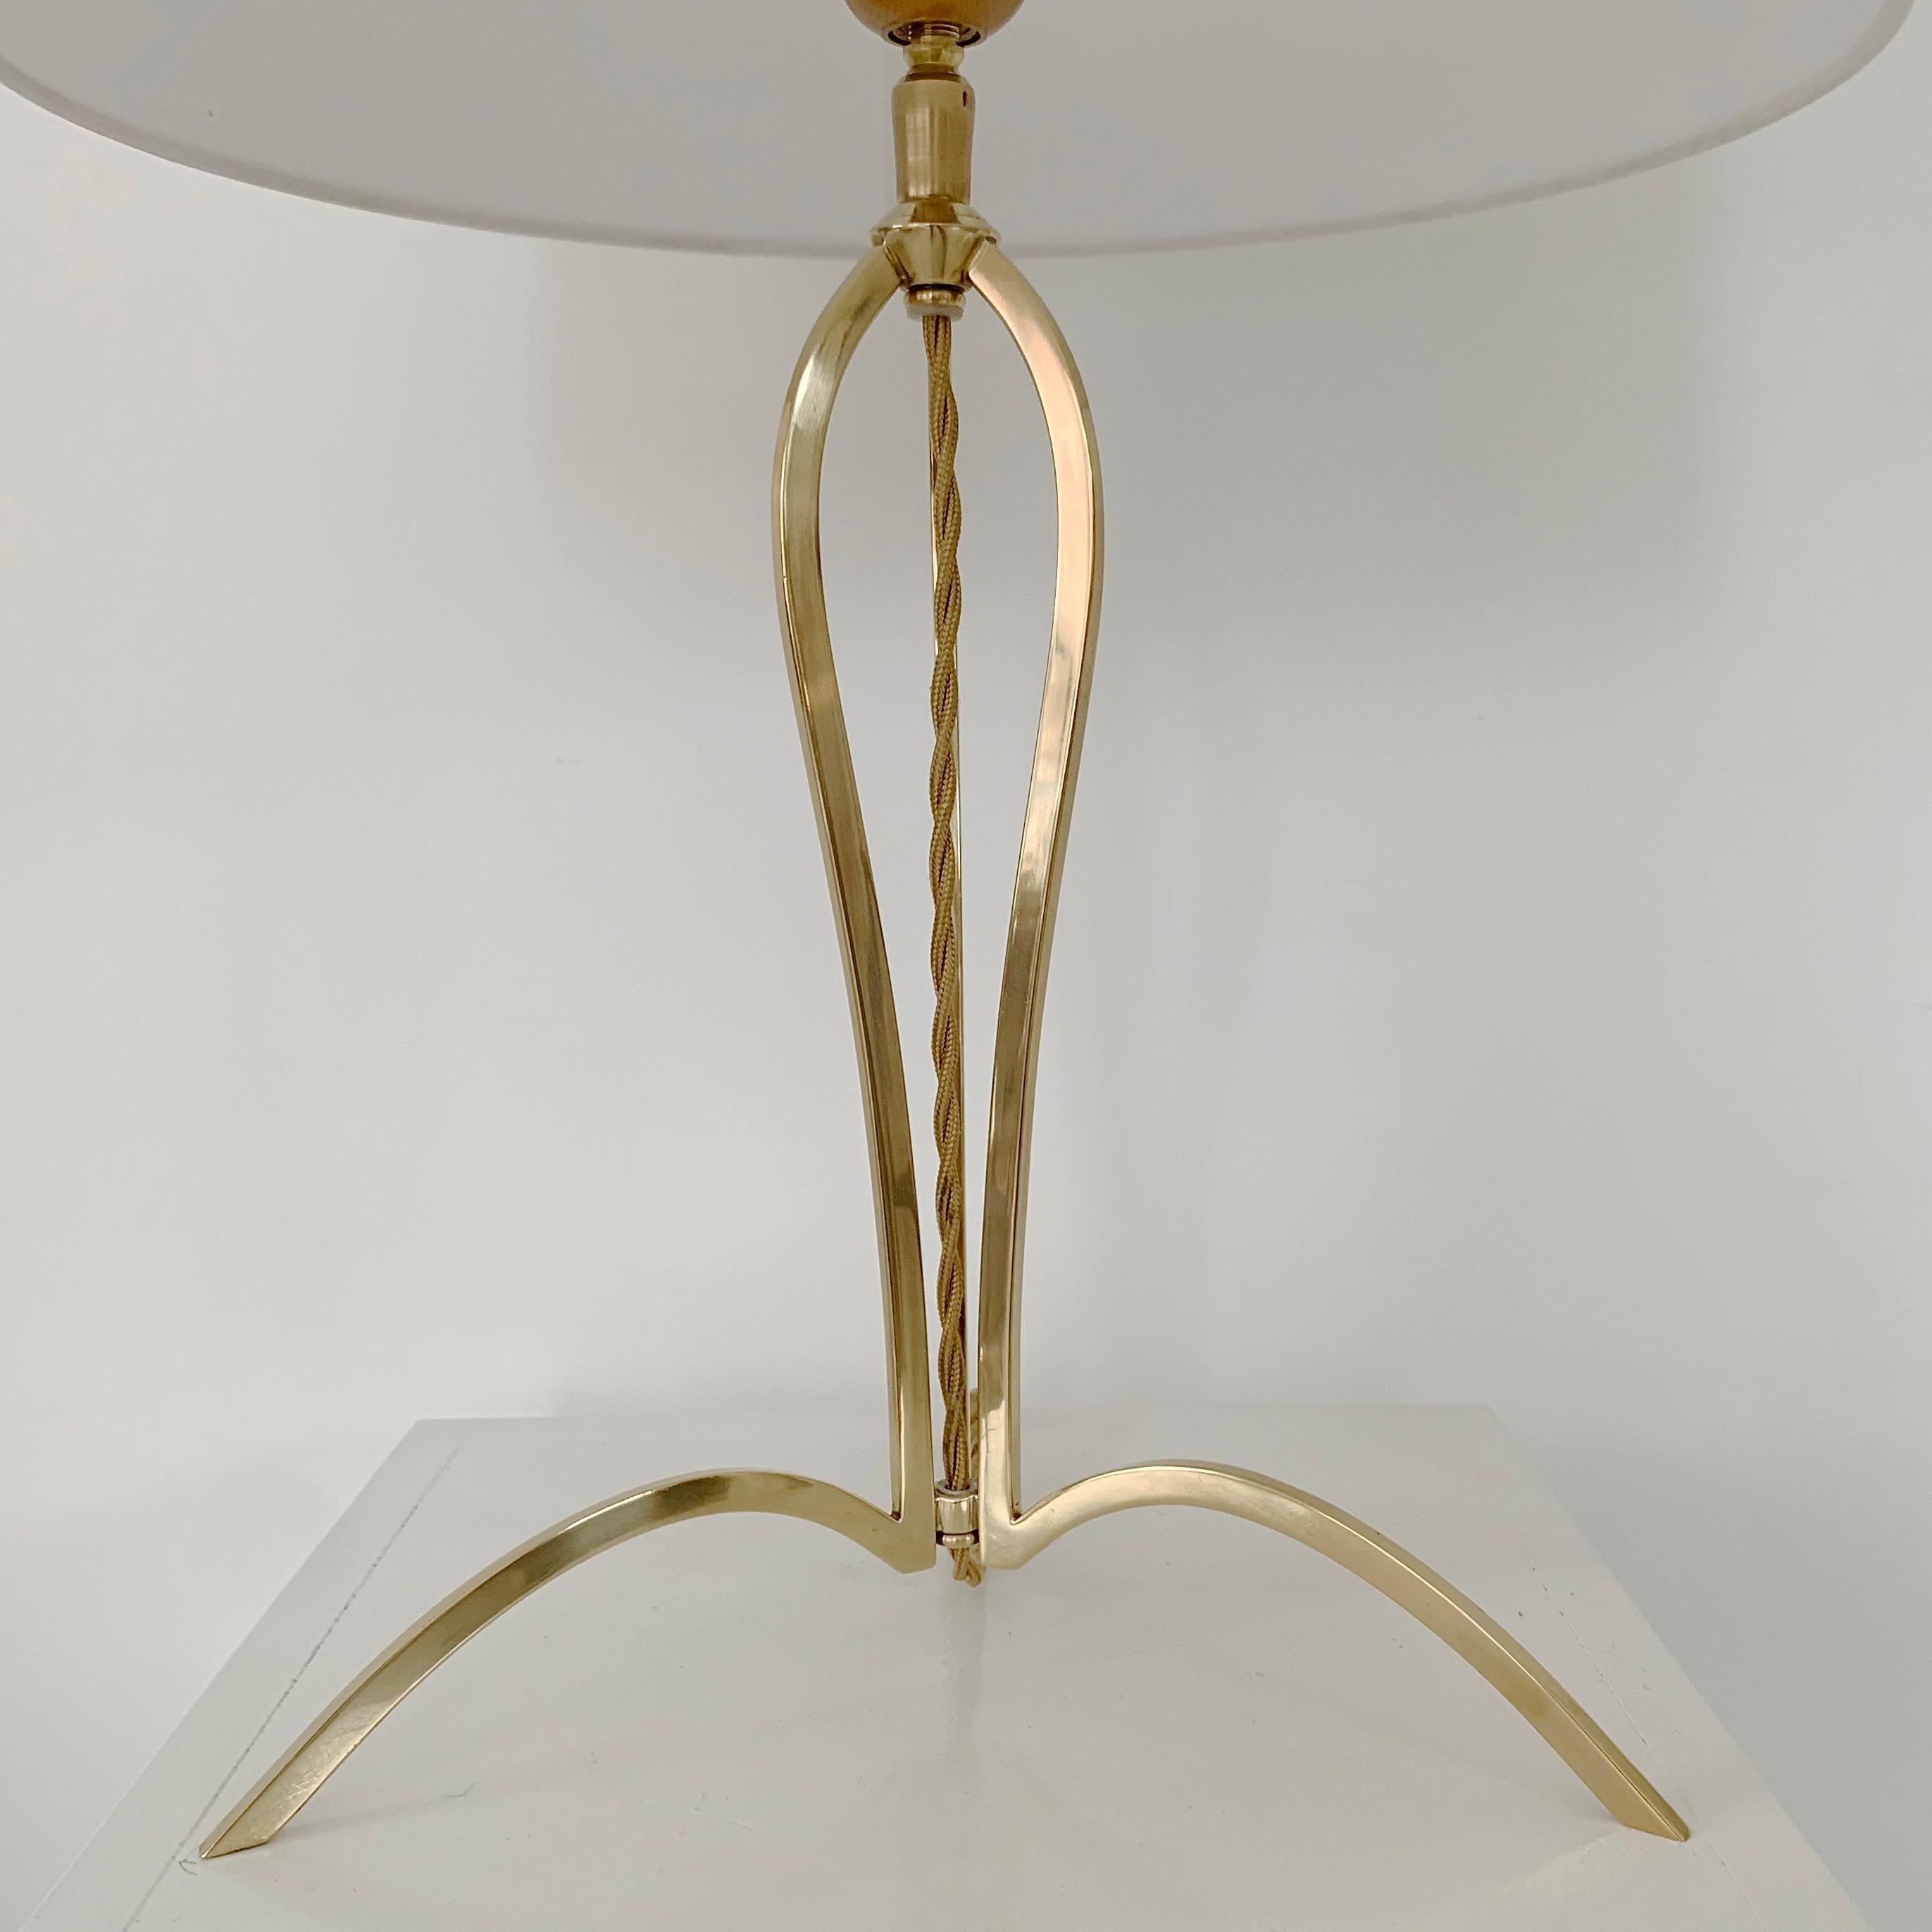 Polished Elegant Mid-Century Brass Table Lamp, circa 1960, Italy. For Sale